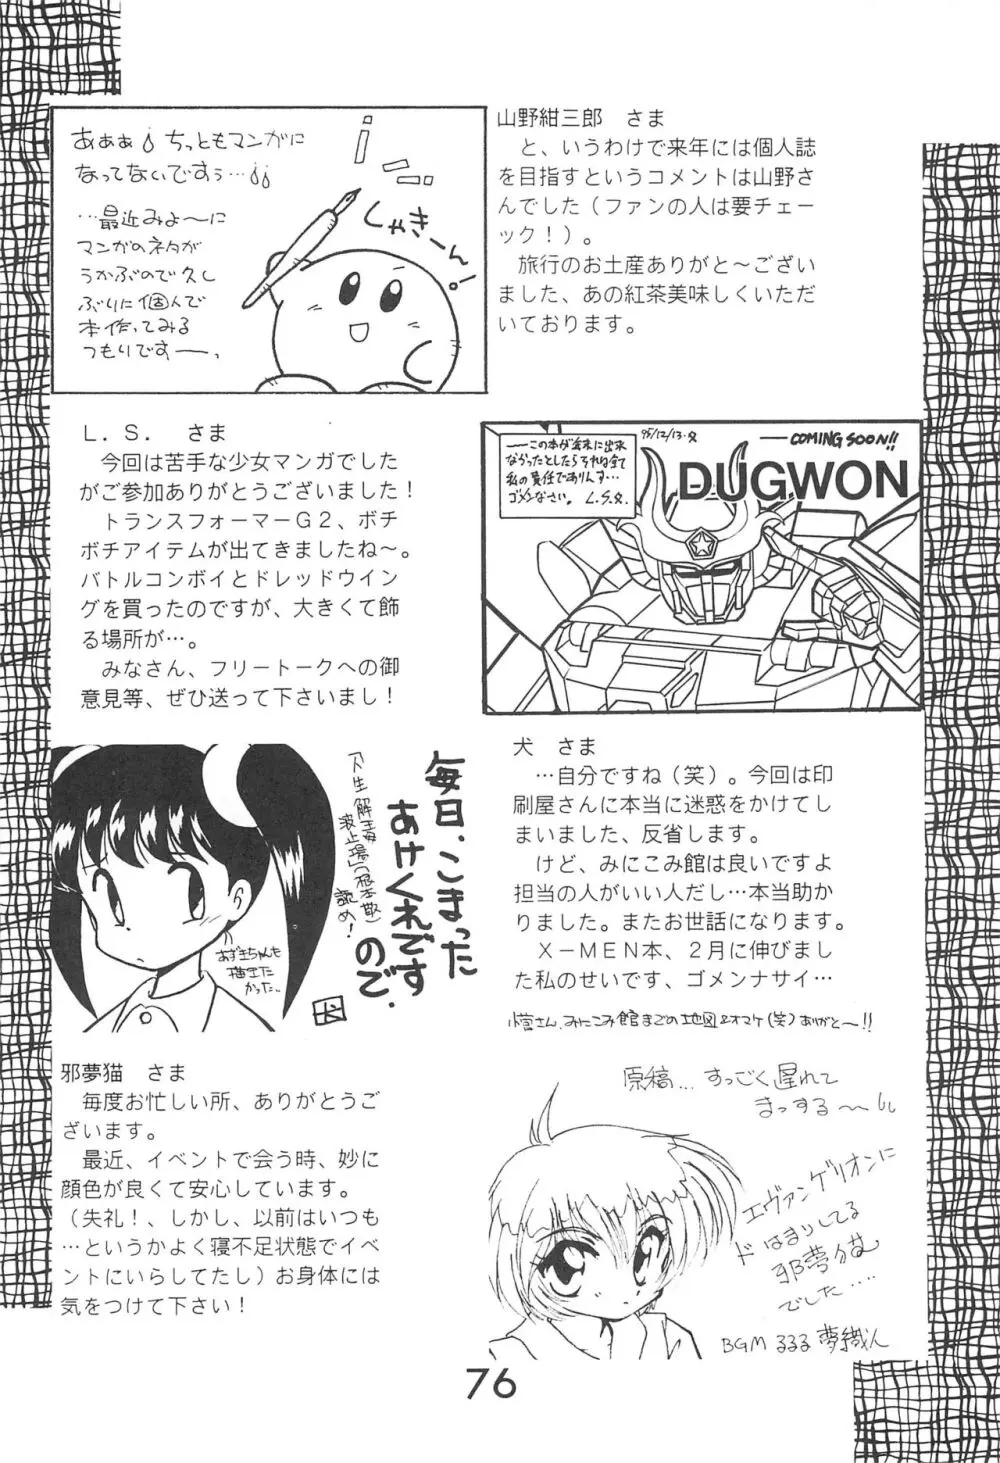 Fun House 9th Chame! - page76